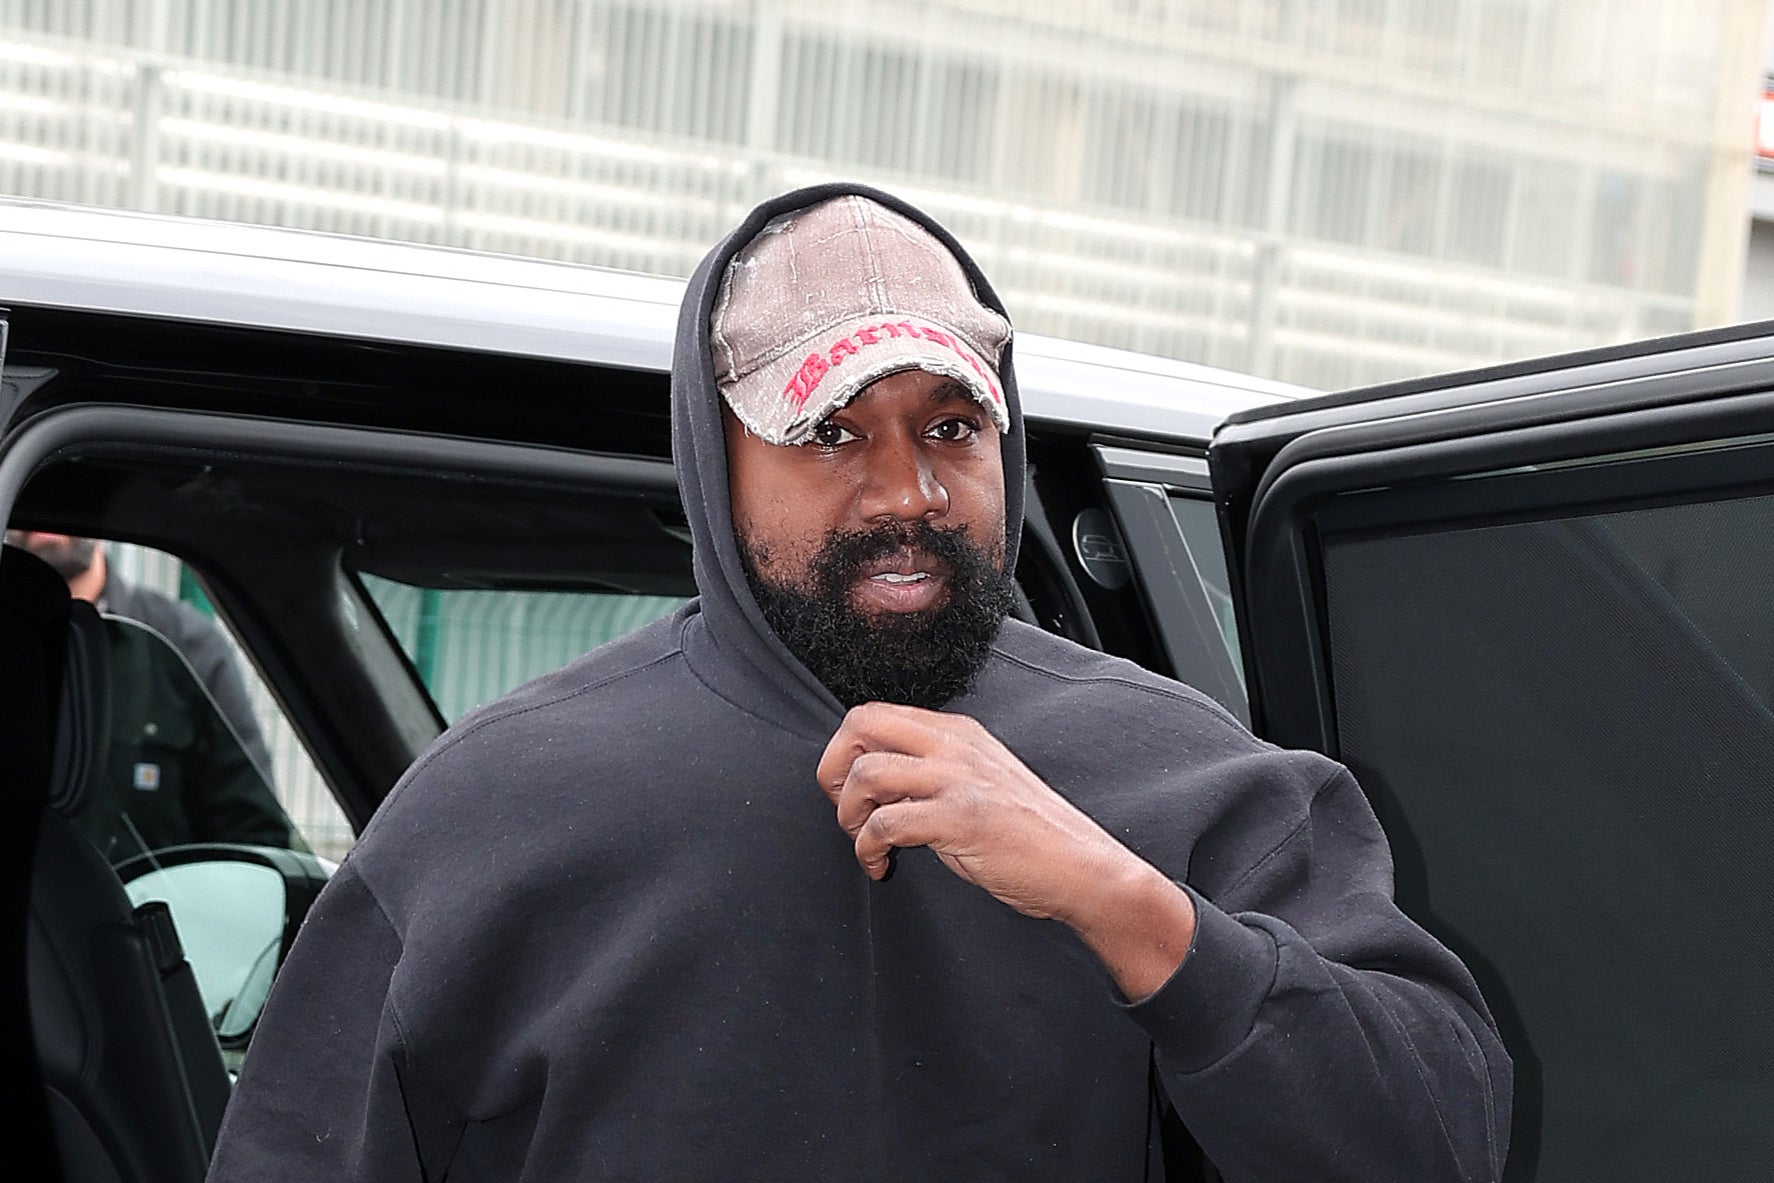 Kanye West was widely condemned for his remarks